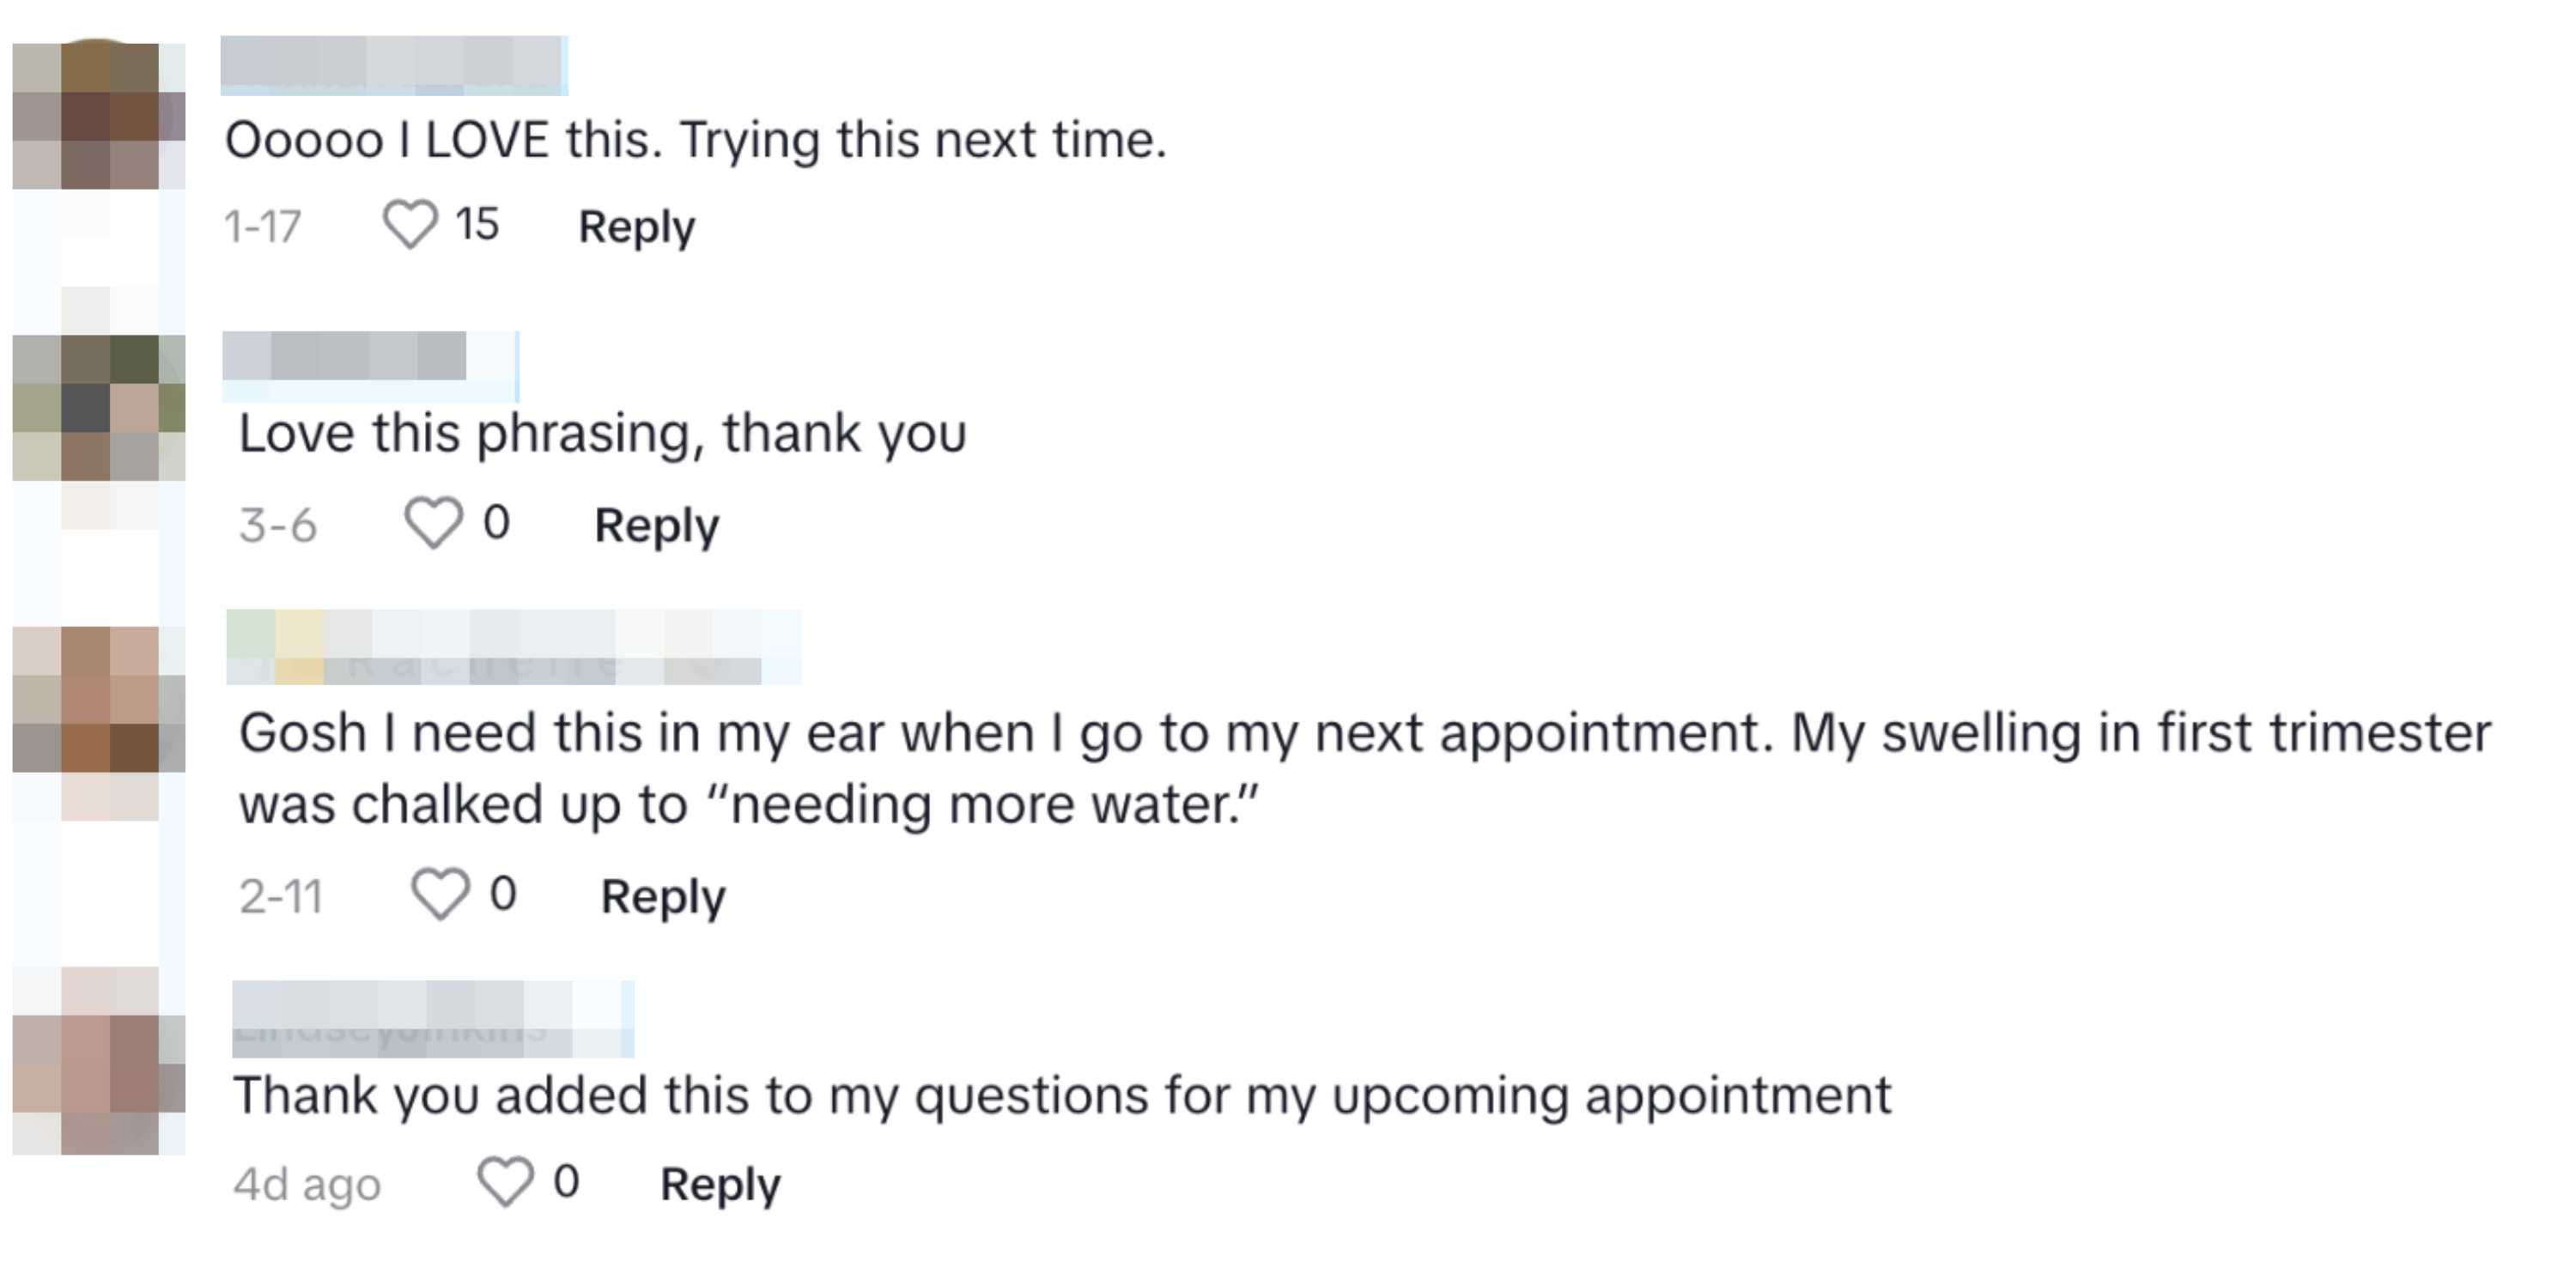 Comments expressing appreciation and adding personal notes related to the original post&#x27;s topic, including &quot;I need this in my ear when I go to my next appointment&quot;